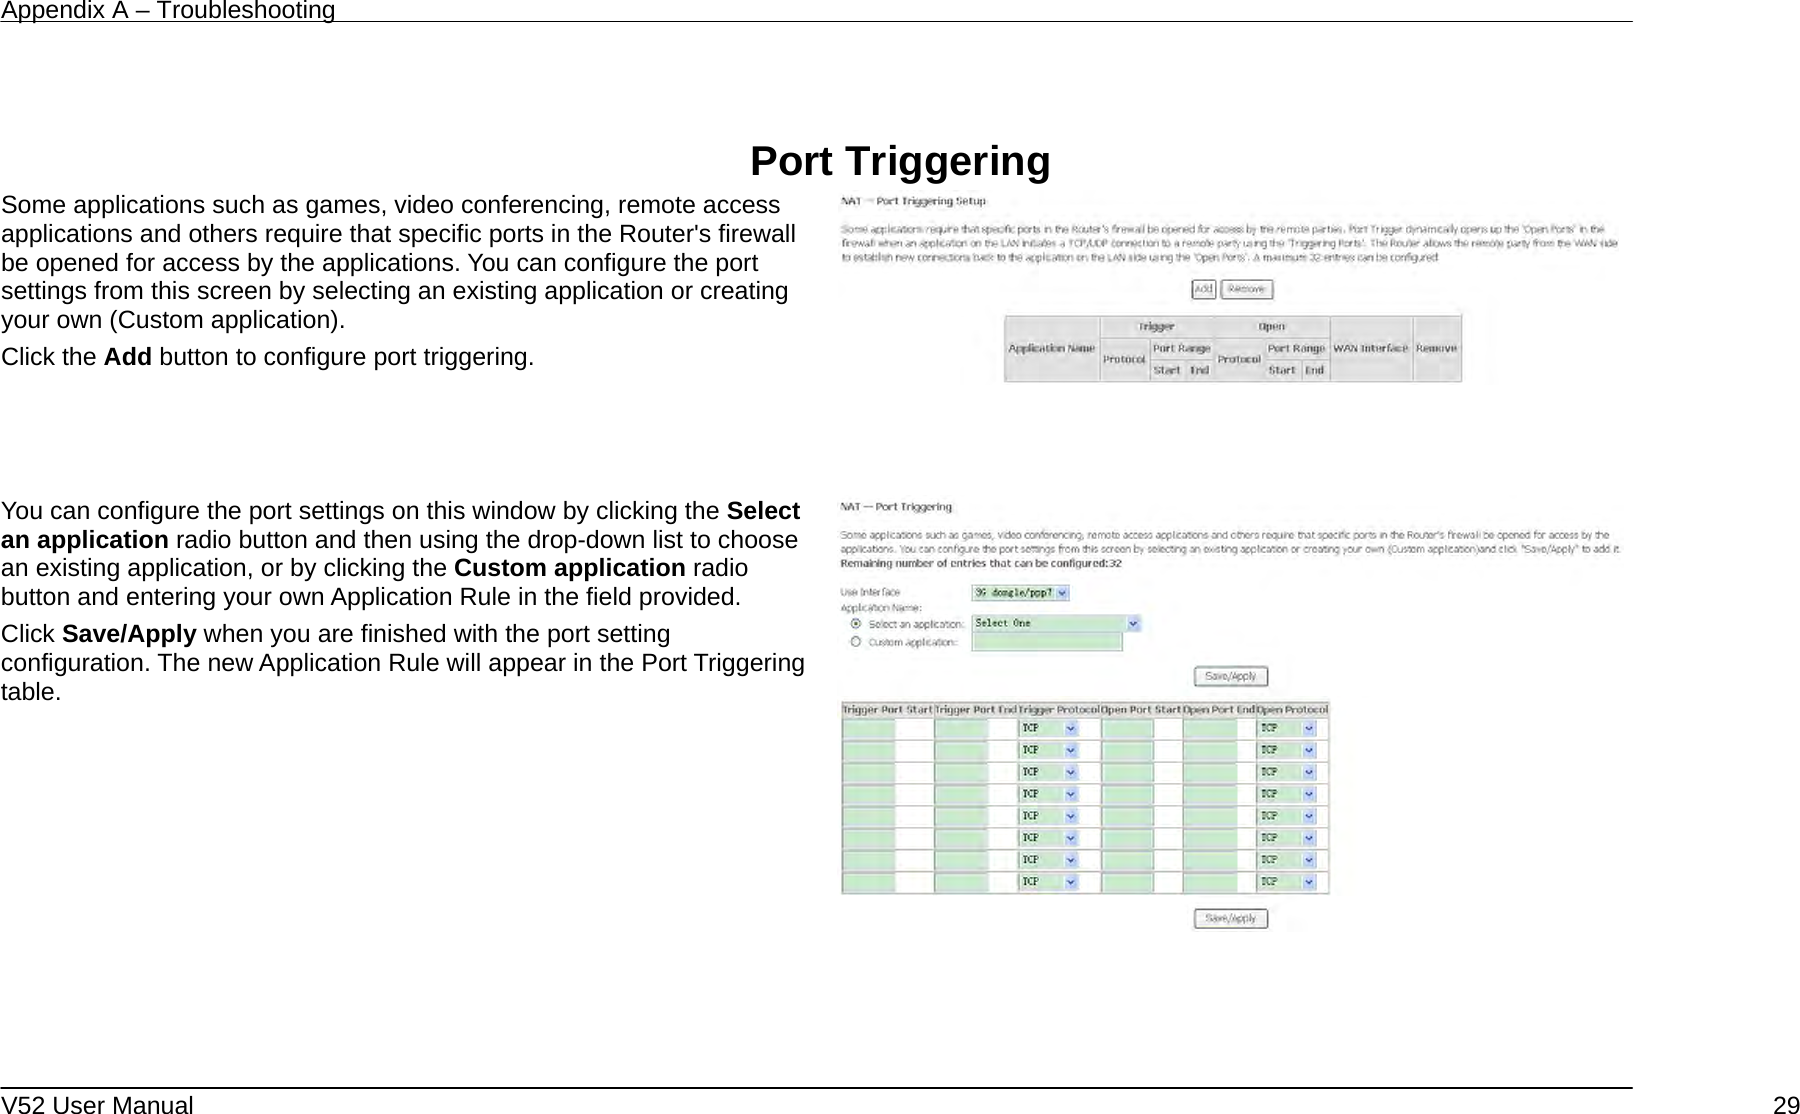 Appendix A – Troubleshooting   V52 User Manual    29  Port Triggering Some applications such as games, video conferencing, remote access applications and others require that specific ports in the Router&apos;s firewall be opened for access by the applications. You can configure the port settings from this screen by selecting an existing application or creating your own (Custom application). Click the Add button to configure port triggering.      You can configure the port settings on this window by clicking the Select an application radio button and then using the drop-down list to choose an existing application, or by clicking the Custom application radio button and entering your own Application Rule in the field provided.   Click Save/Apply when you are finished with the port setting configuration. The new Application Rule will appear in the Port Triggering table.    